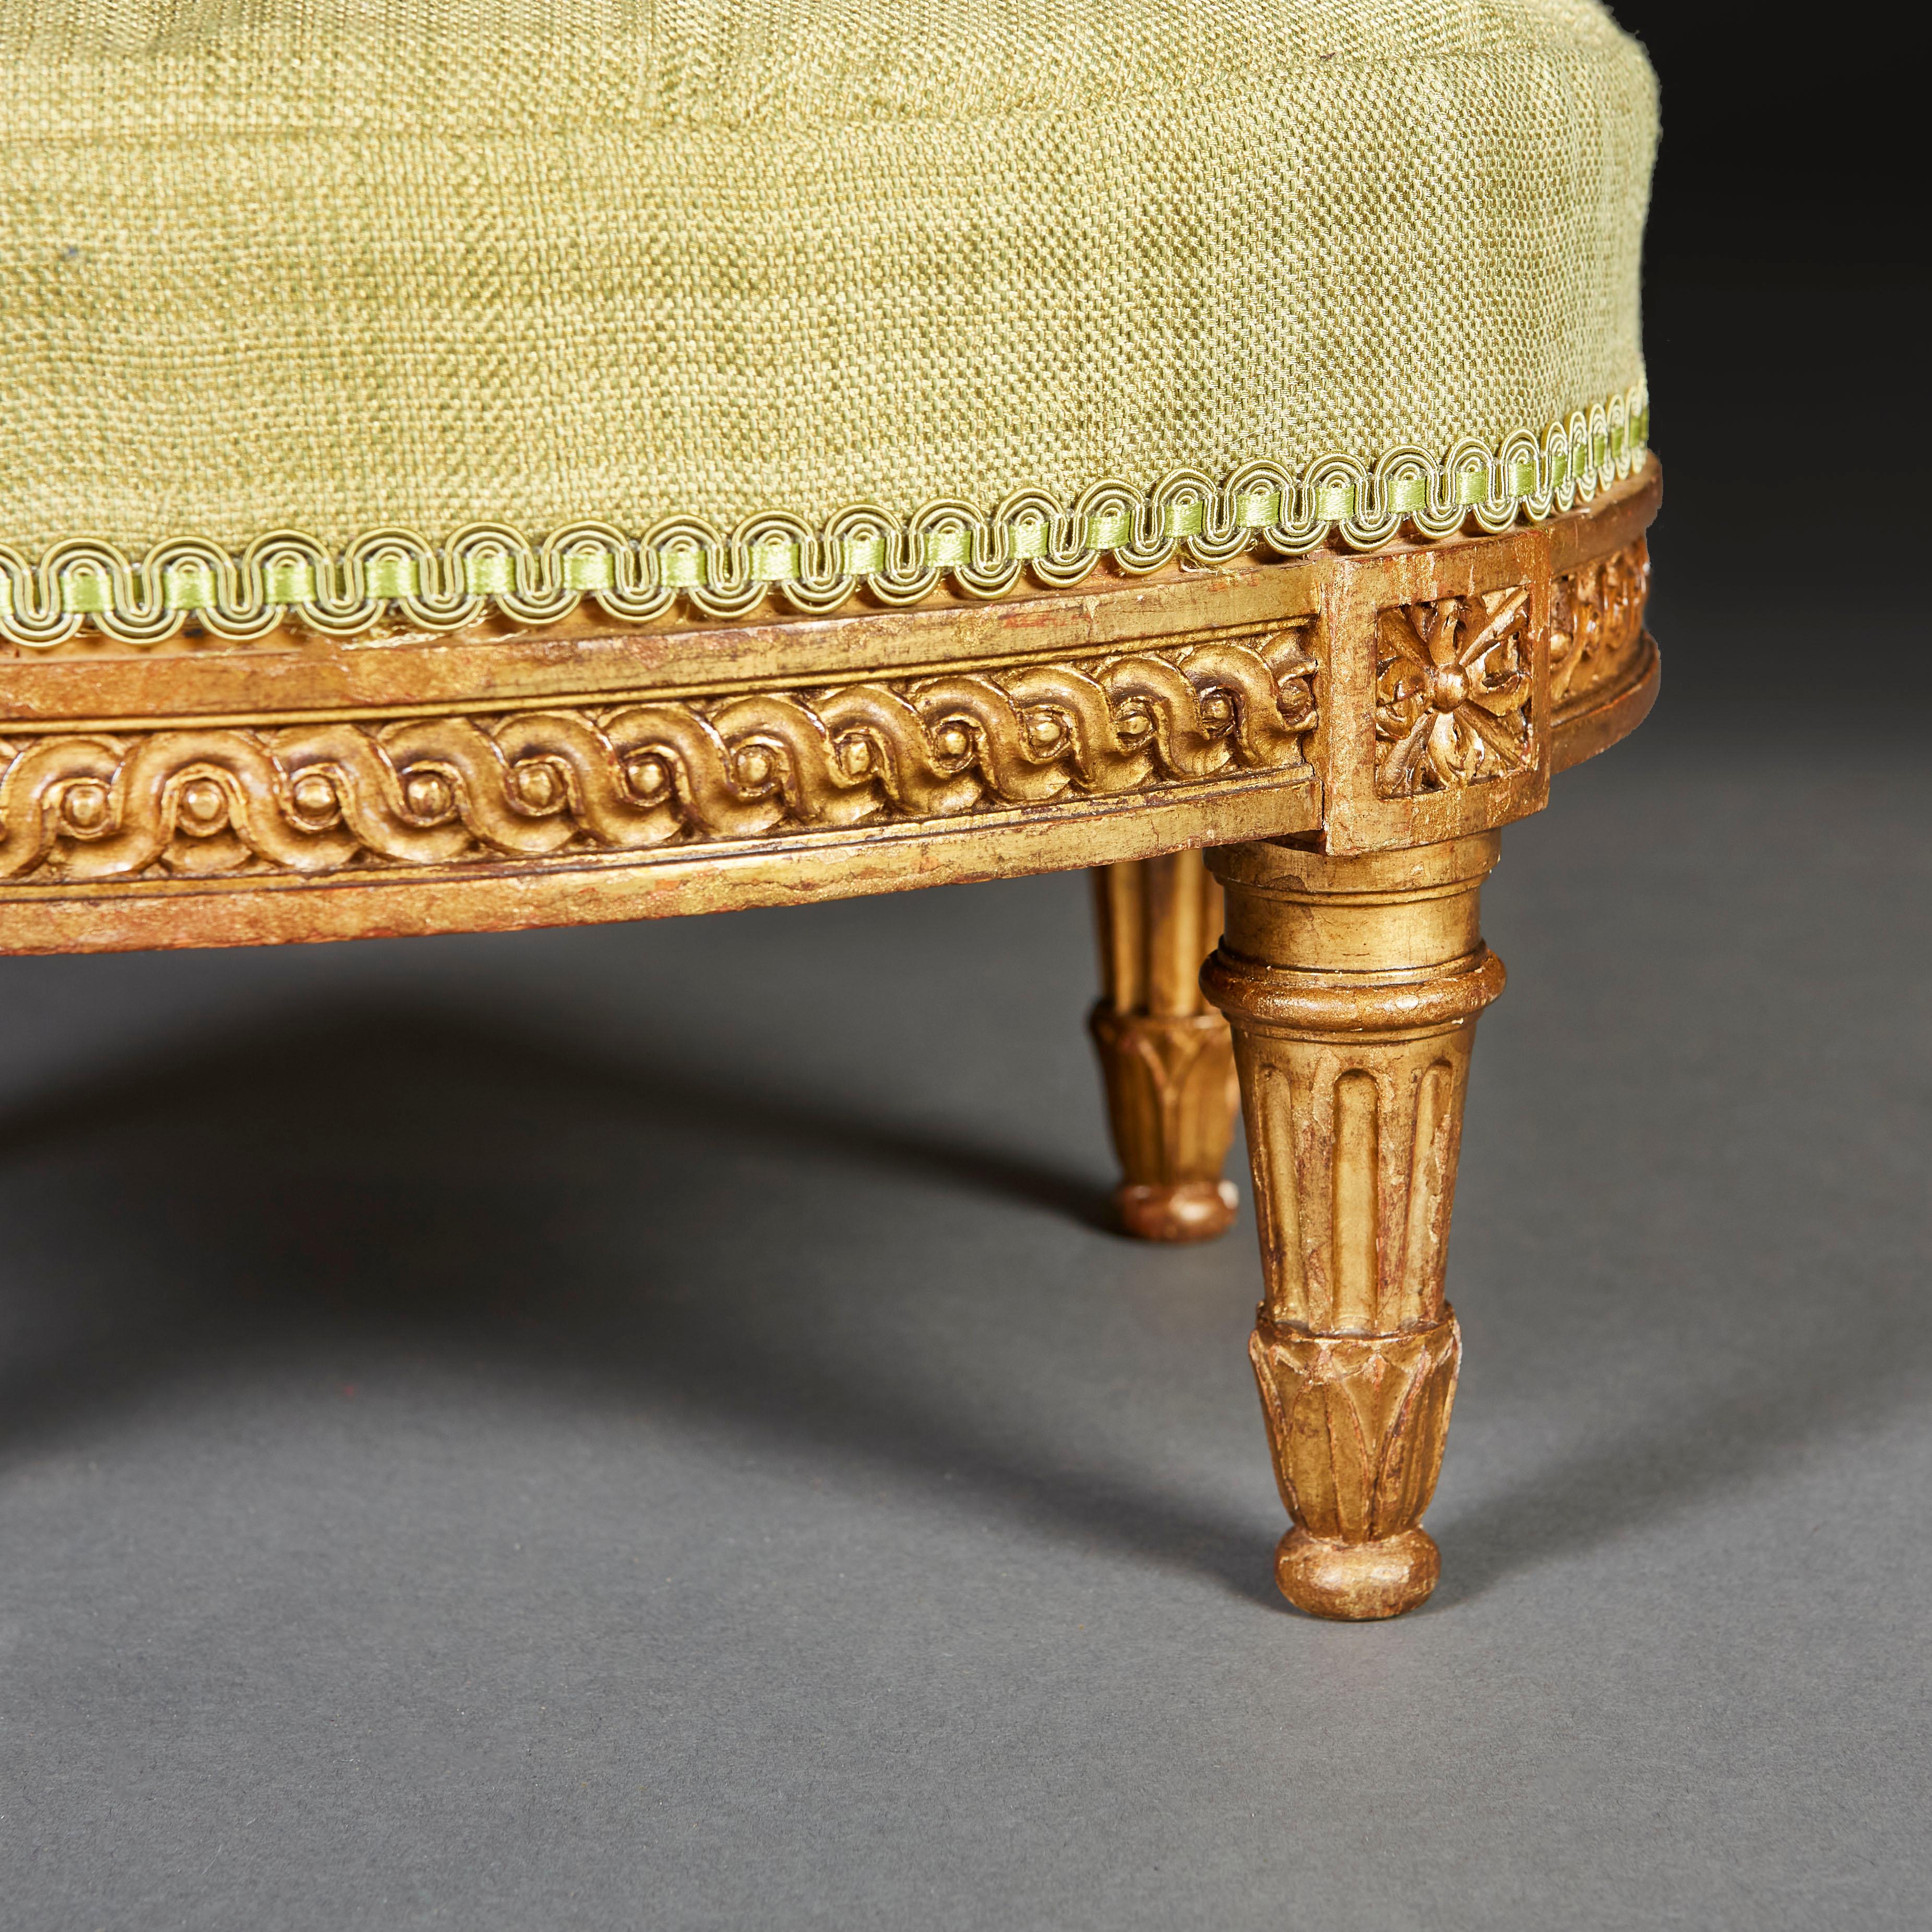 Matched Pair of 18th Century French Giltwood Footstools In Good Condition For Sale In London, GB